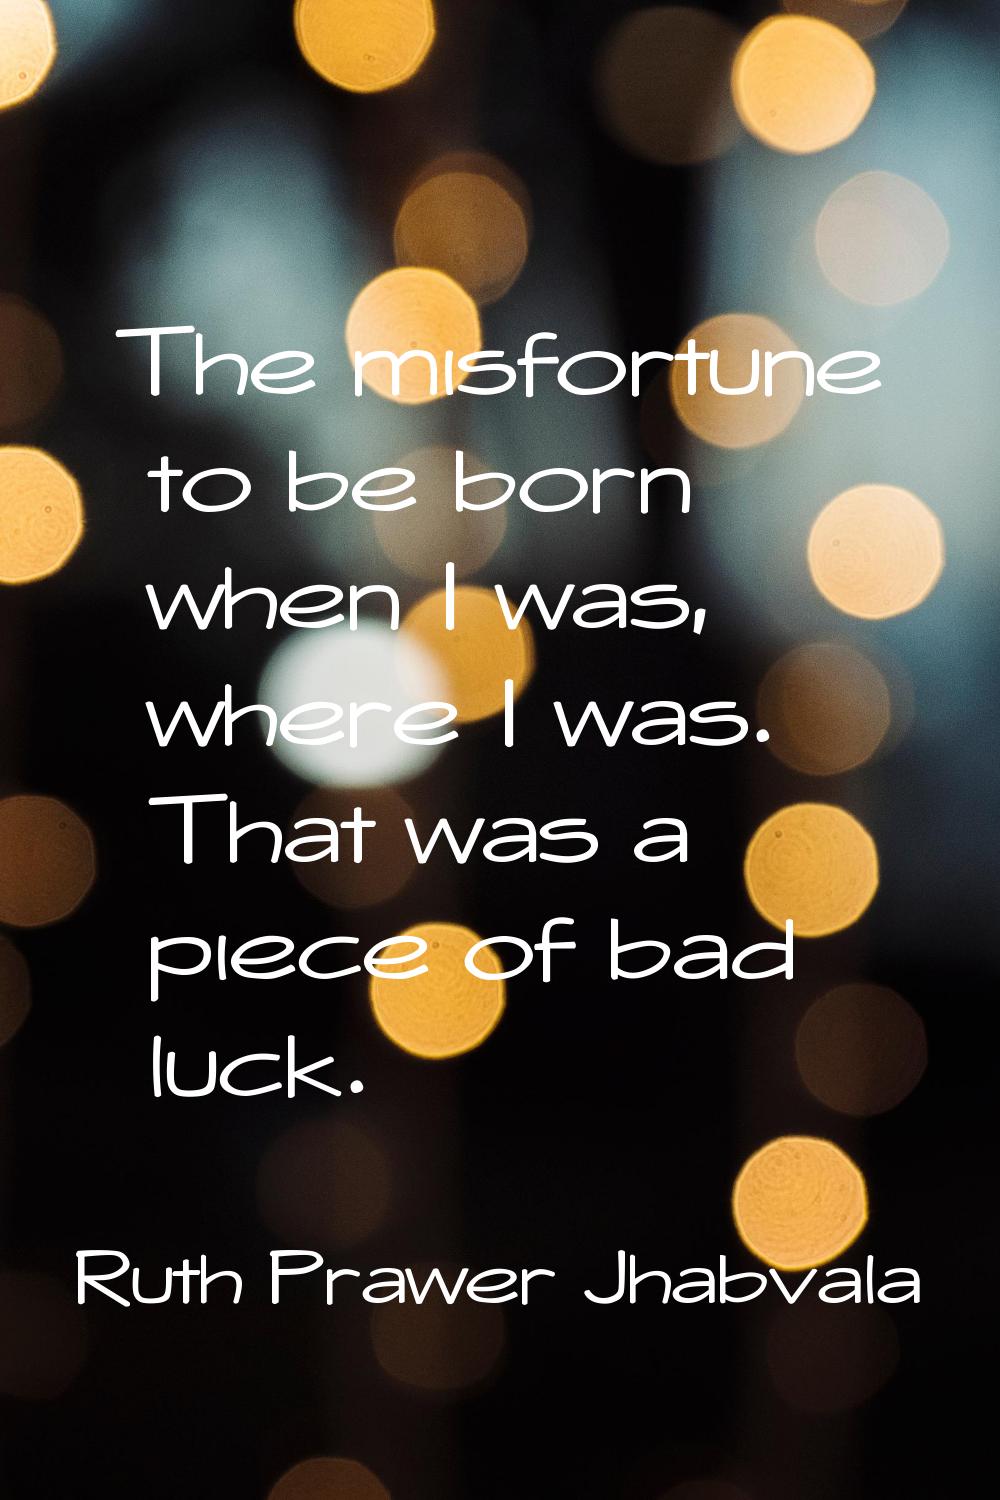 The misfortune to be born when I was, where I was. That was a piece of bad luck.